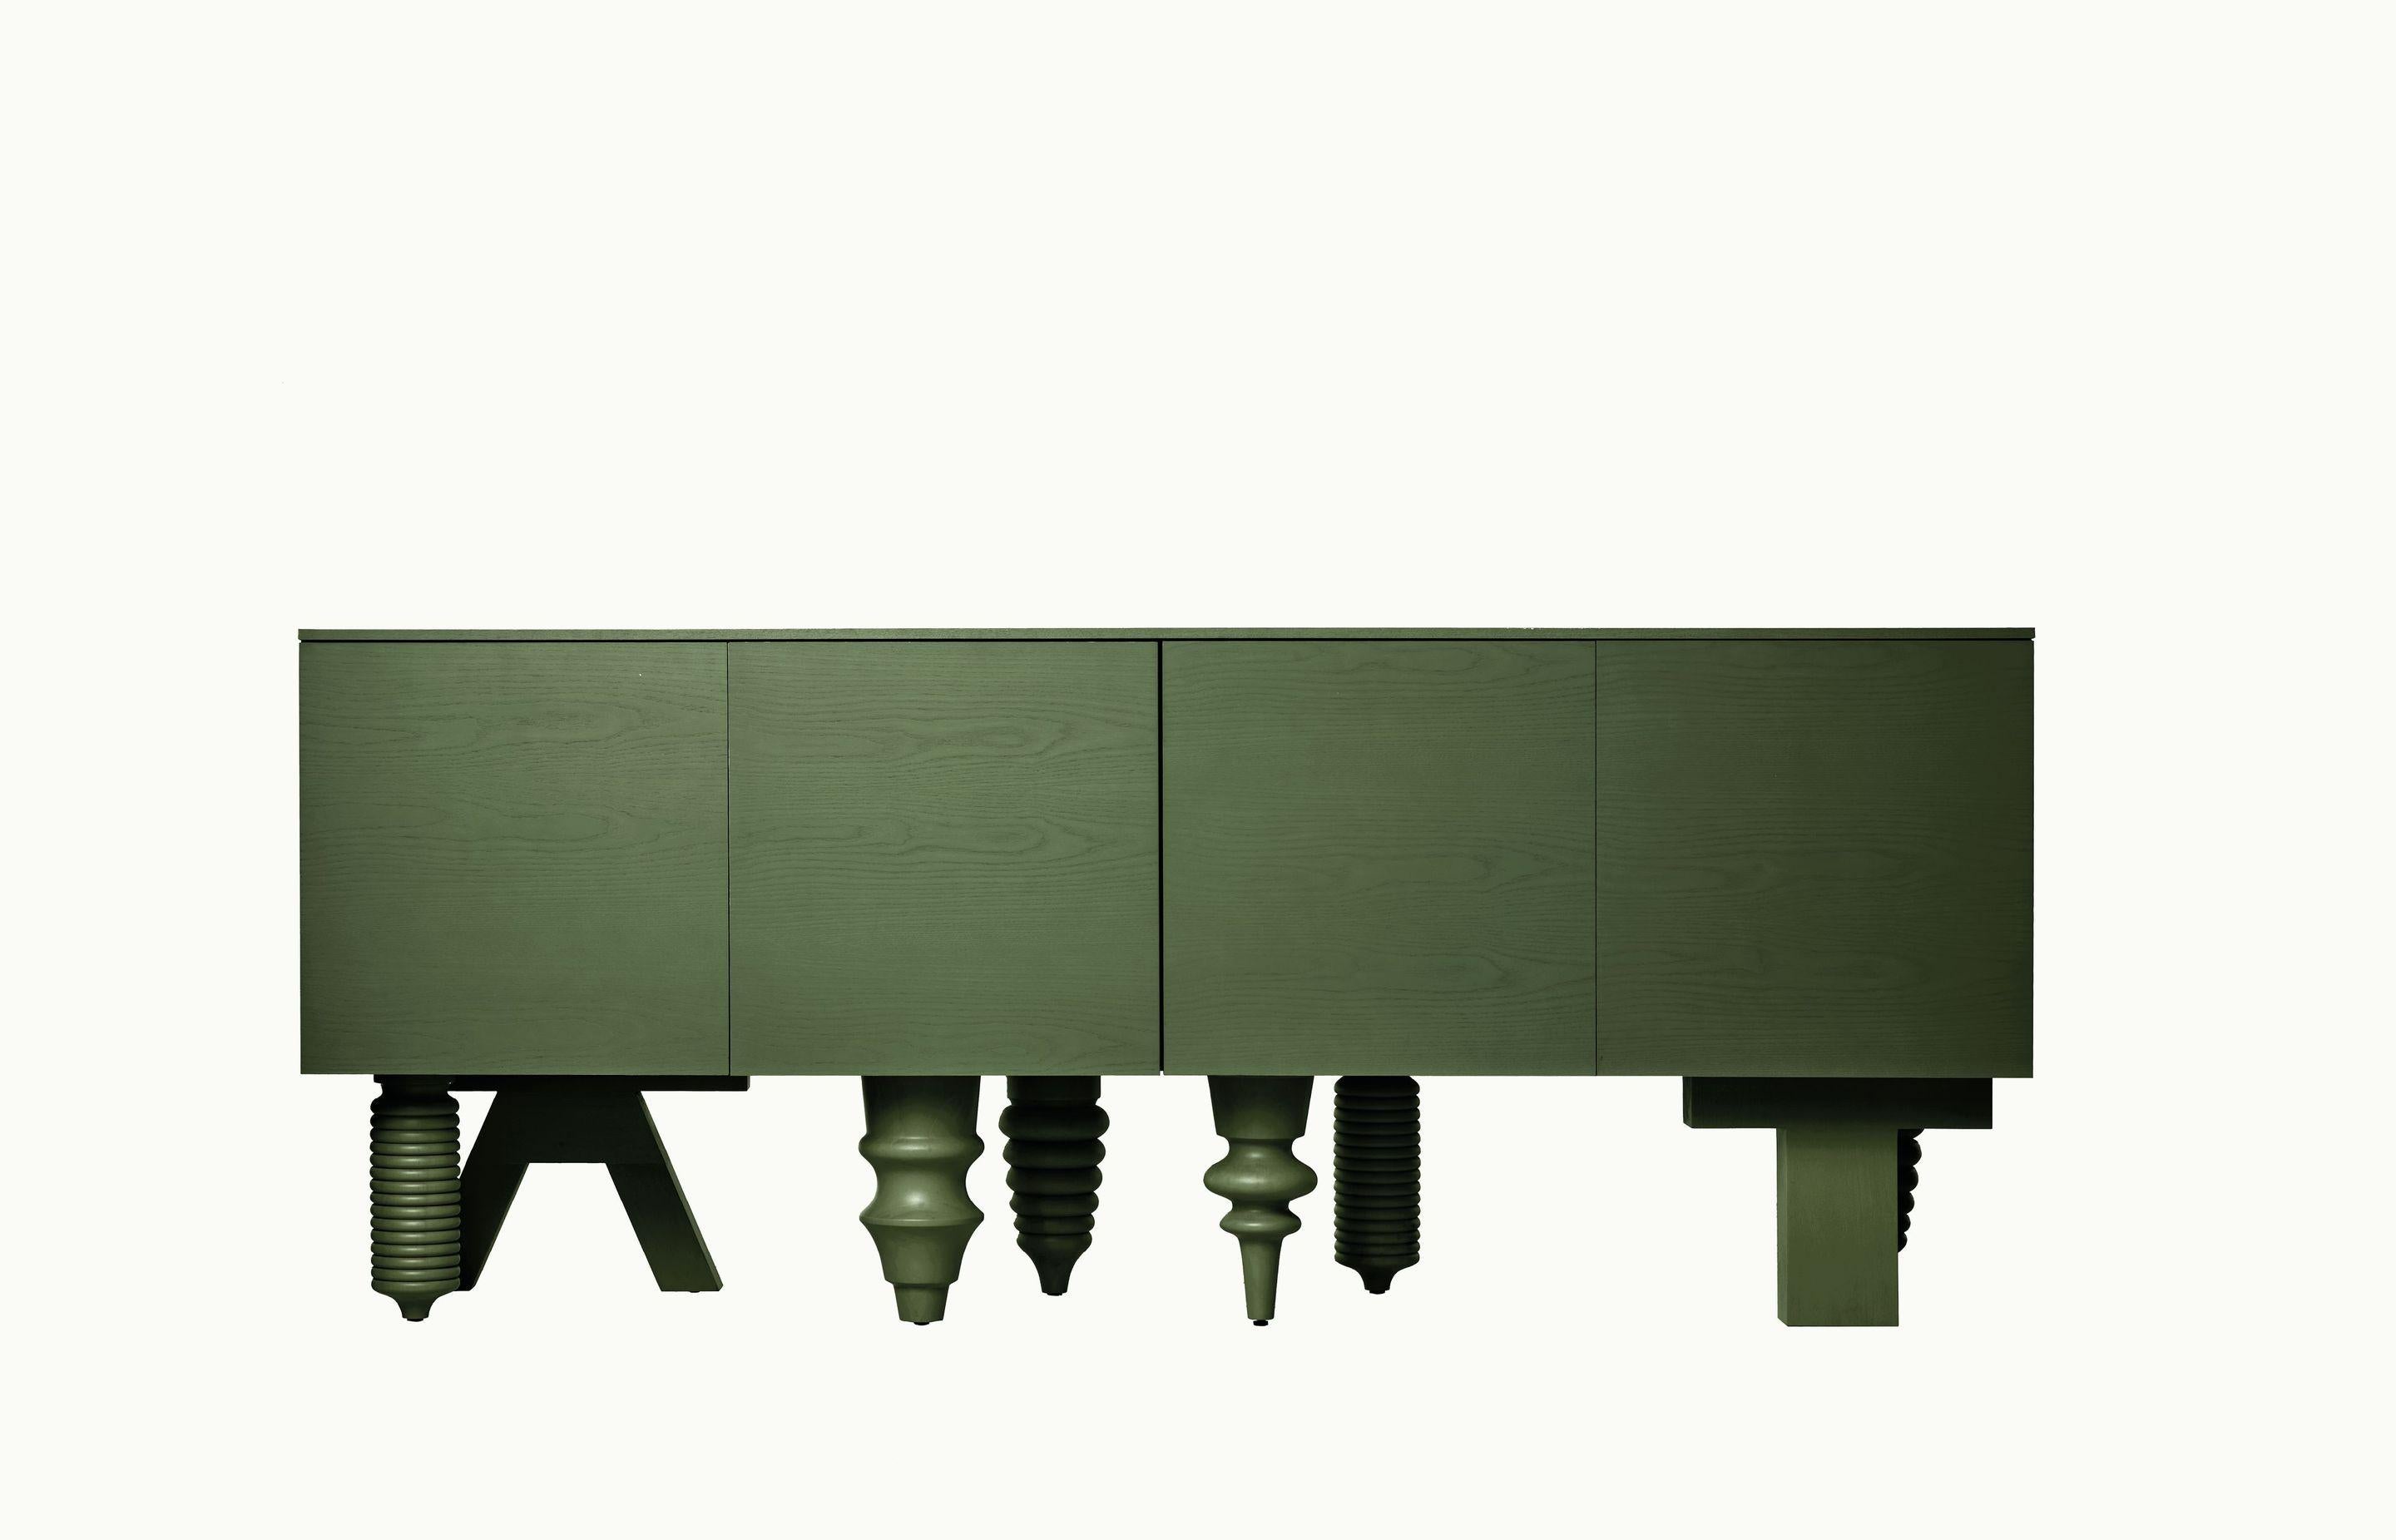 2M Multileg Cabinet in Olive Green by Jaime Hayon for BD Barcelona

It can be uniquely configured with twelve elaborate leg options, customisable finishes and colours, and a multitude of interior storage variations. The Multileg is disciplined and